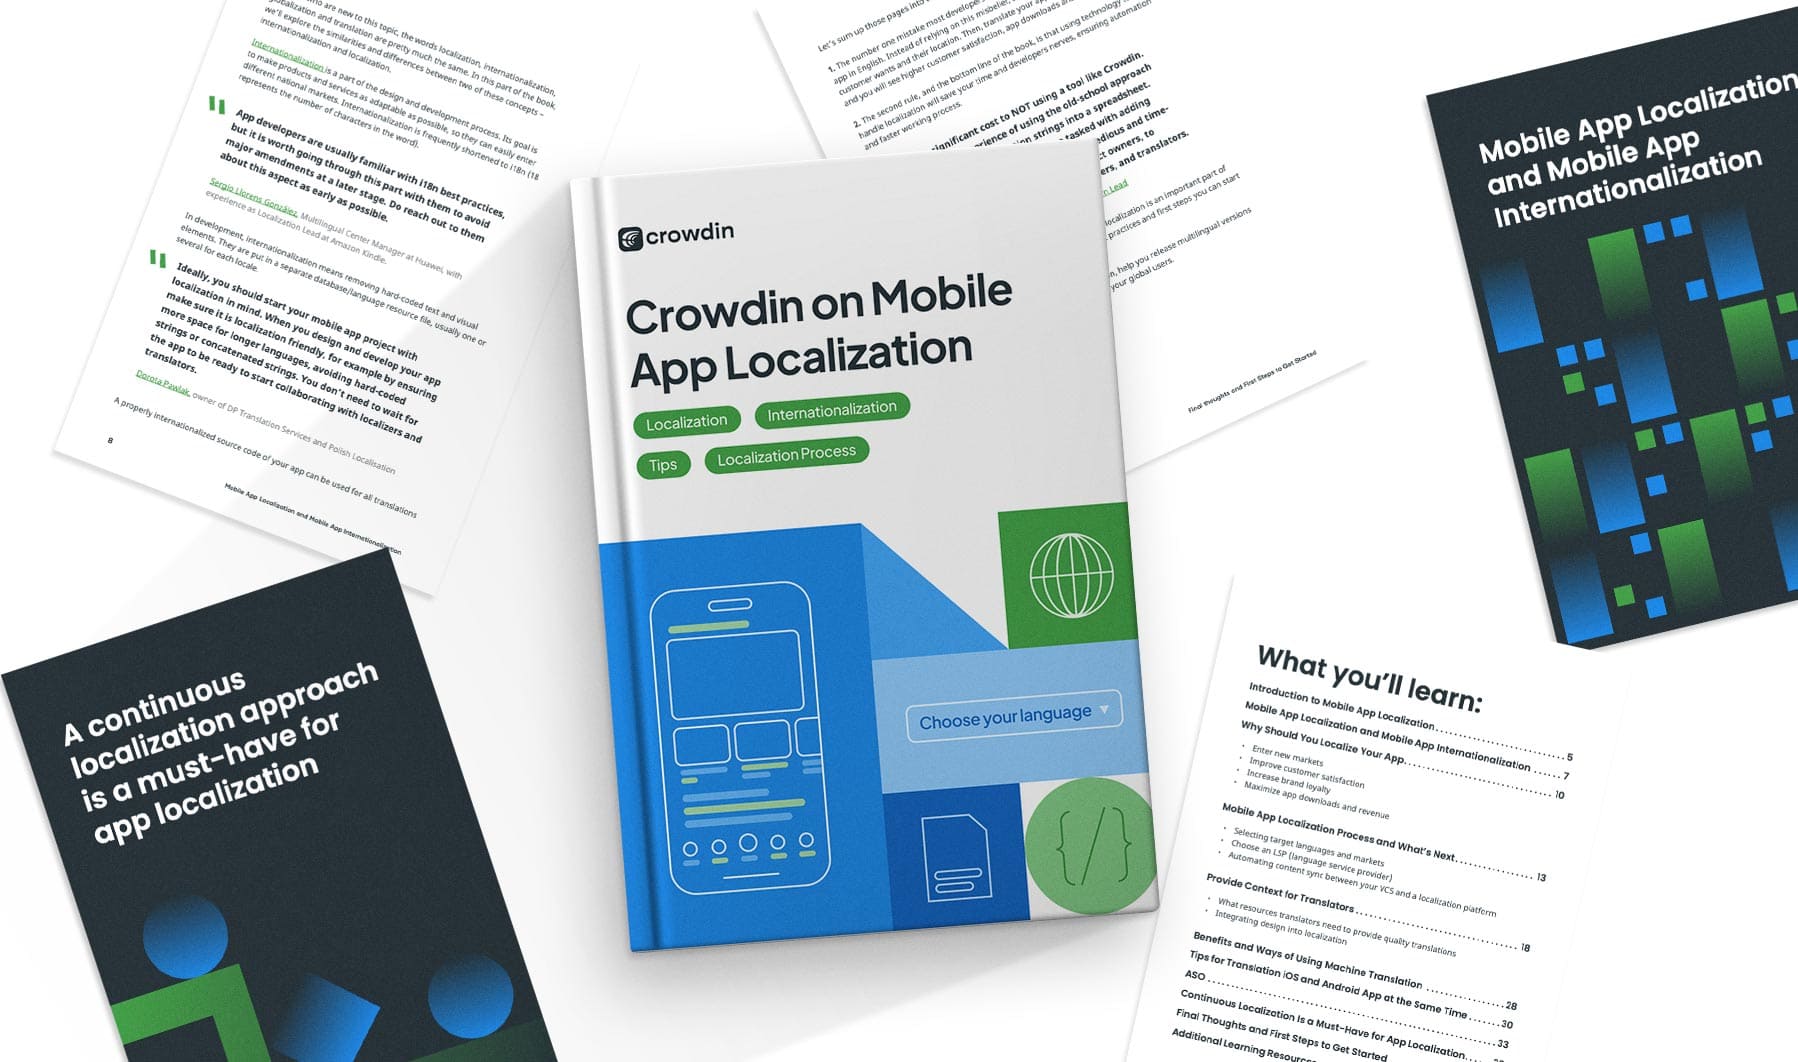 How to Localize Your Mobile App: A Free E-book